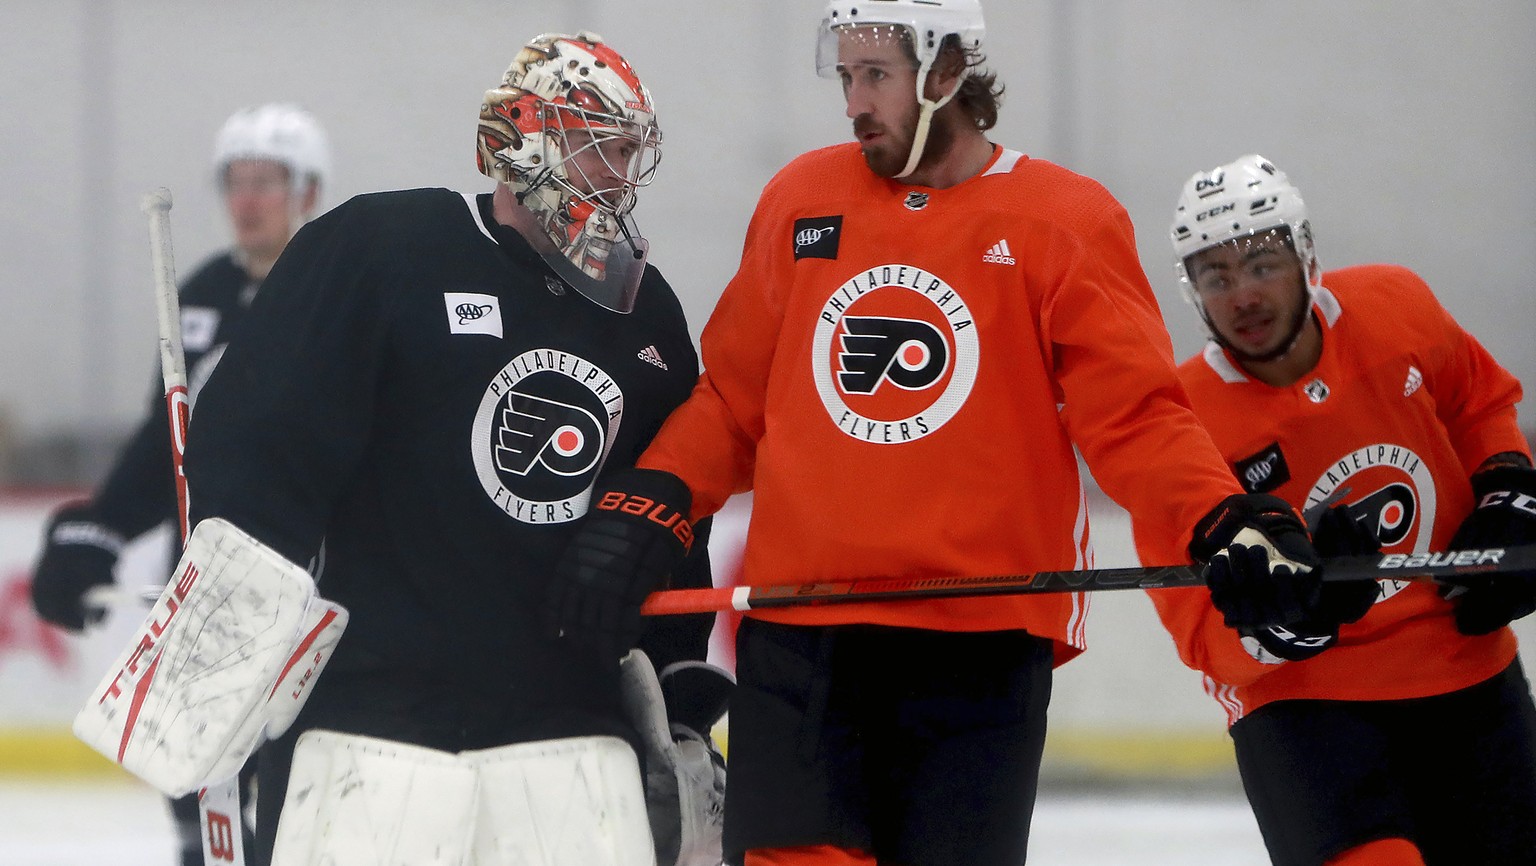 CORRECTS PERSON AT RIGHT TO KEVIN HAYES AND NOT JAKUB VORACEK AS ORIGINALLY SENT - Philadelphia Flyers goalie Carter Hart, left, and Kevin Hayes talk during an NHL hockey practice in Voorhees, N.J., T ...